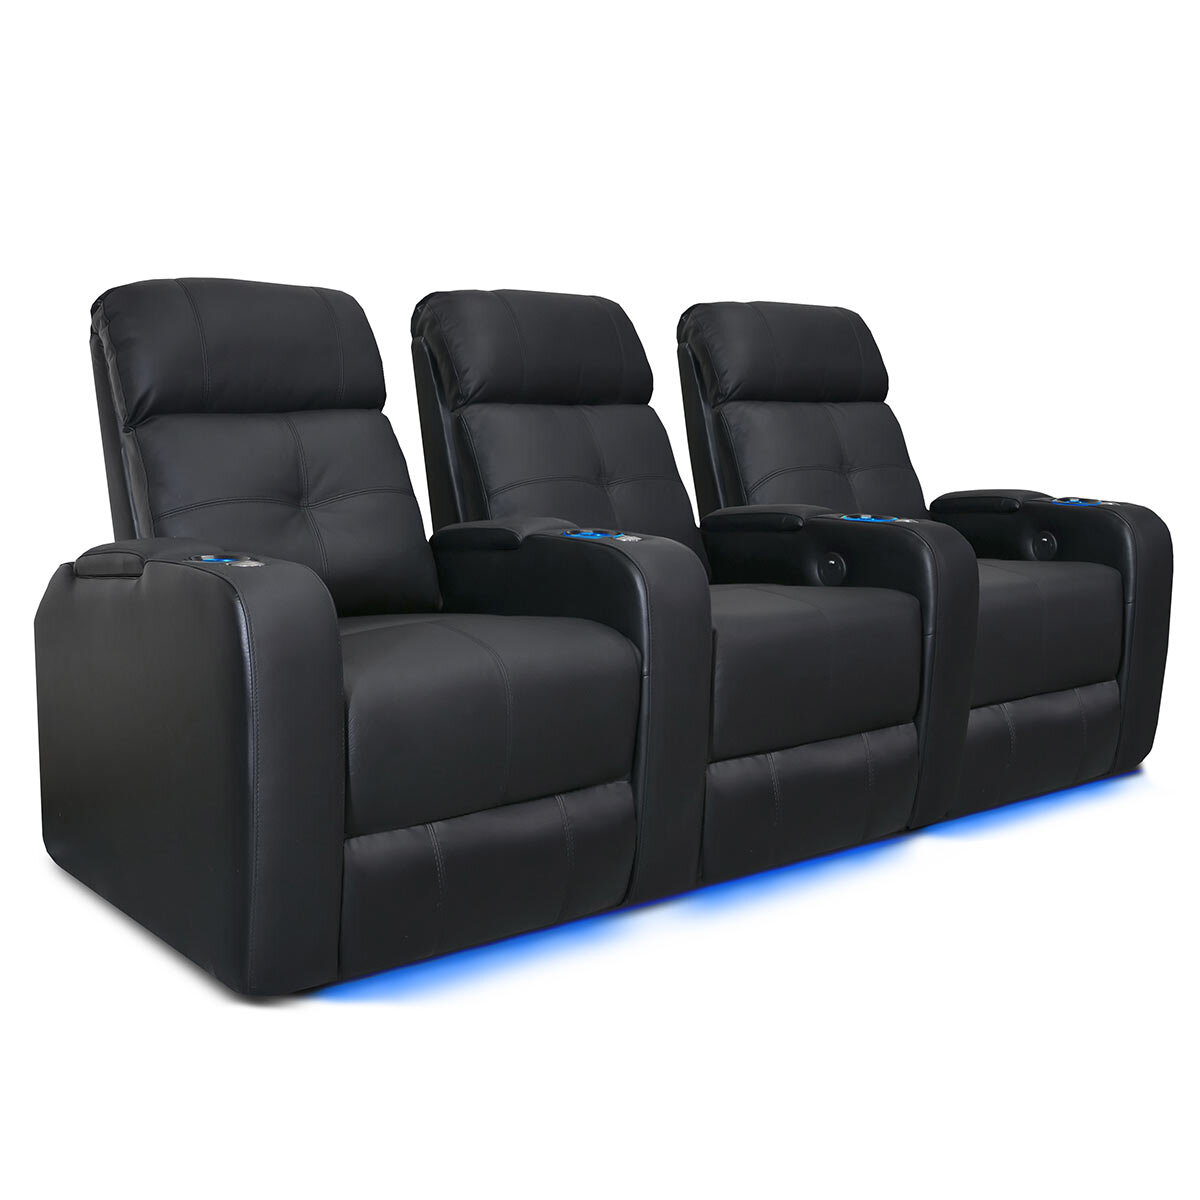 Valencia Home Theatre Seating Verona Row of 3 Chairs, Black